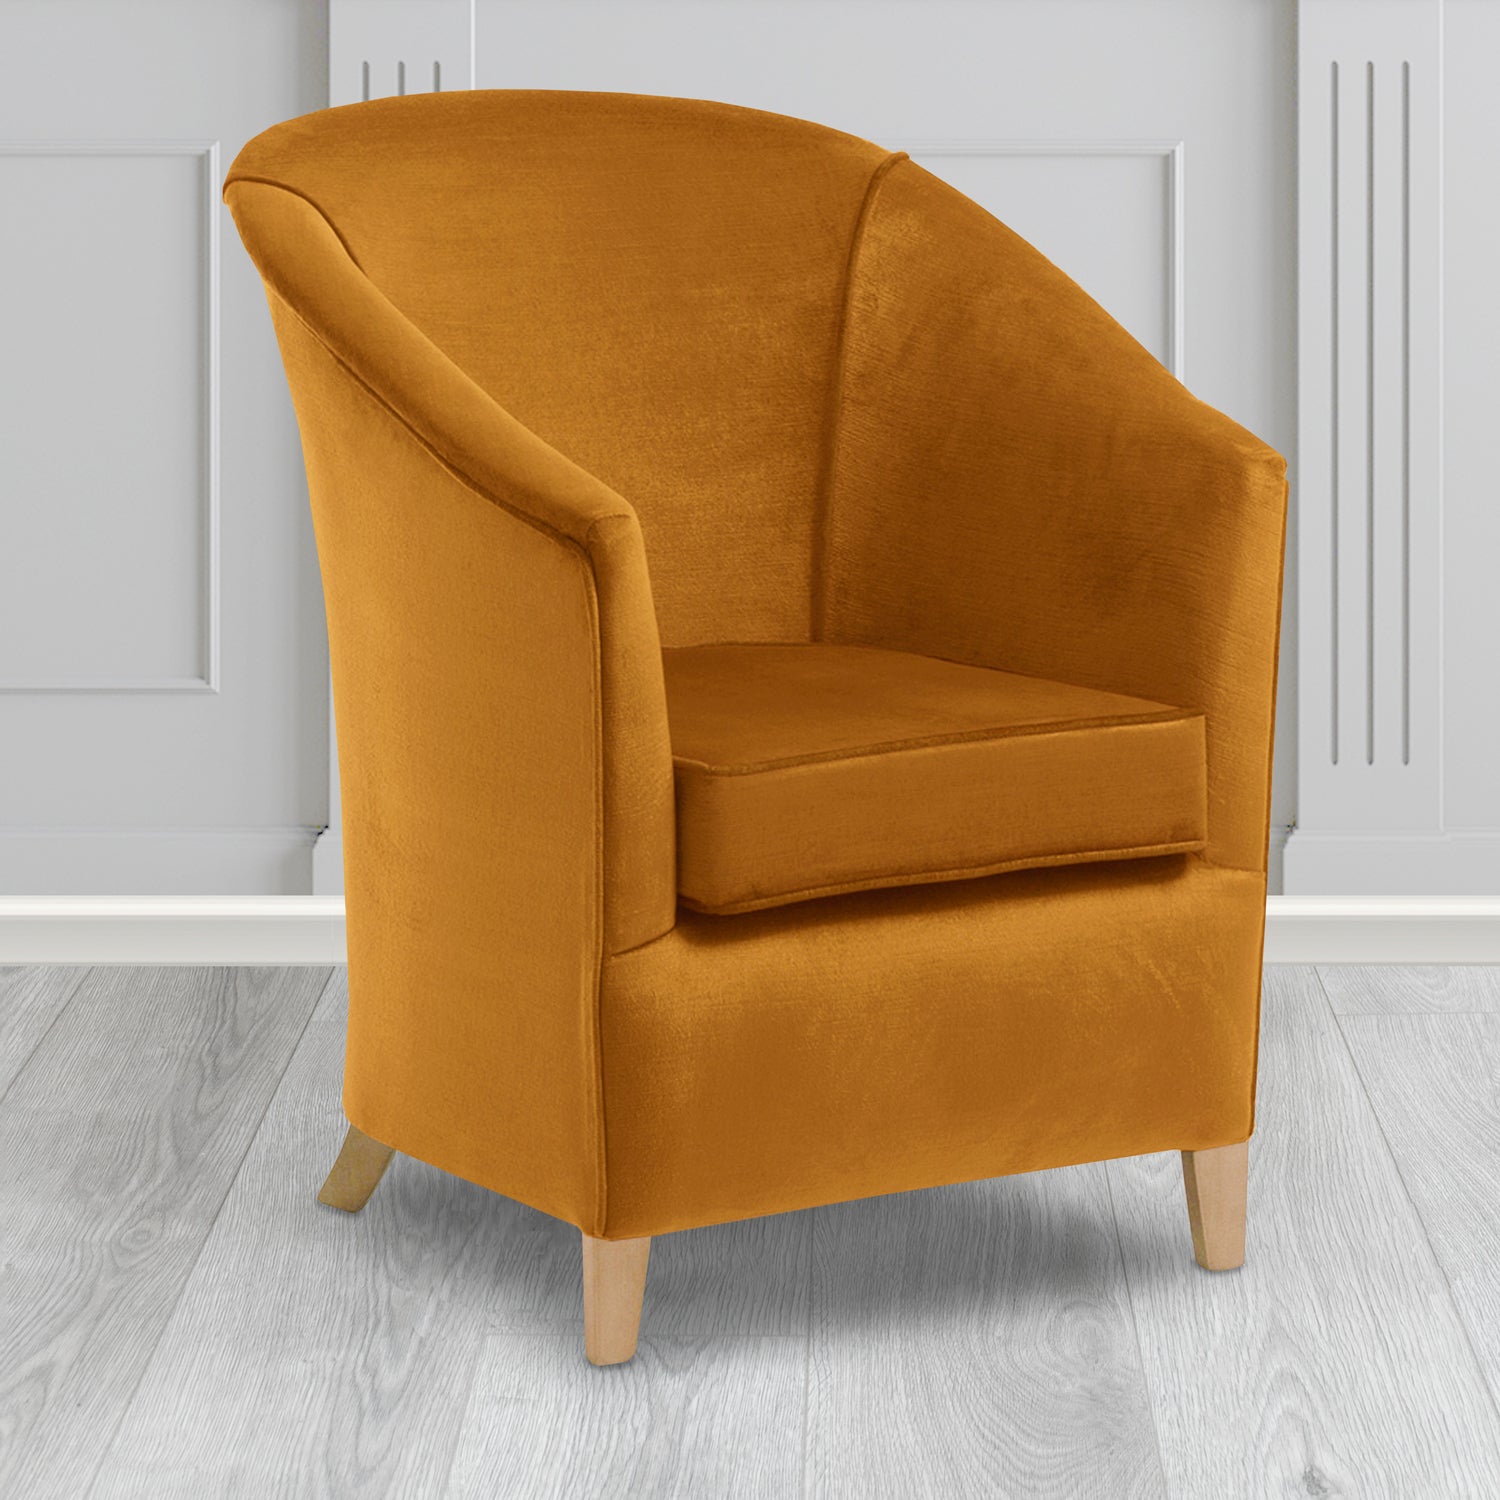 Bolton Tub Chair in Noble 824 Ochre Crib 5 Velvet Fabric - Water Resistant - The Tub Chair Shop